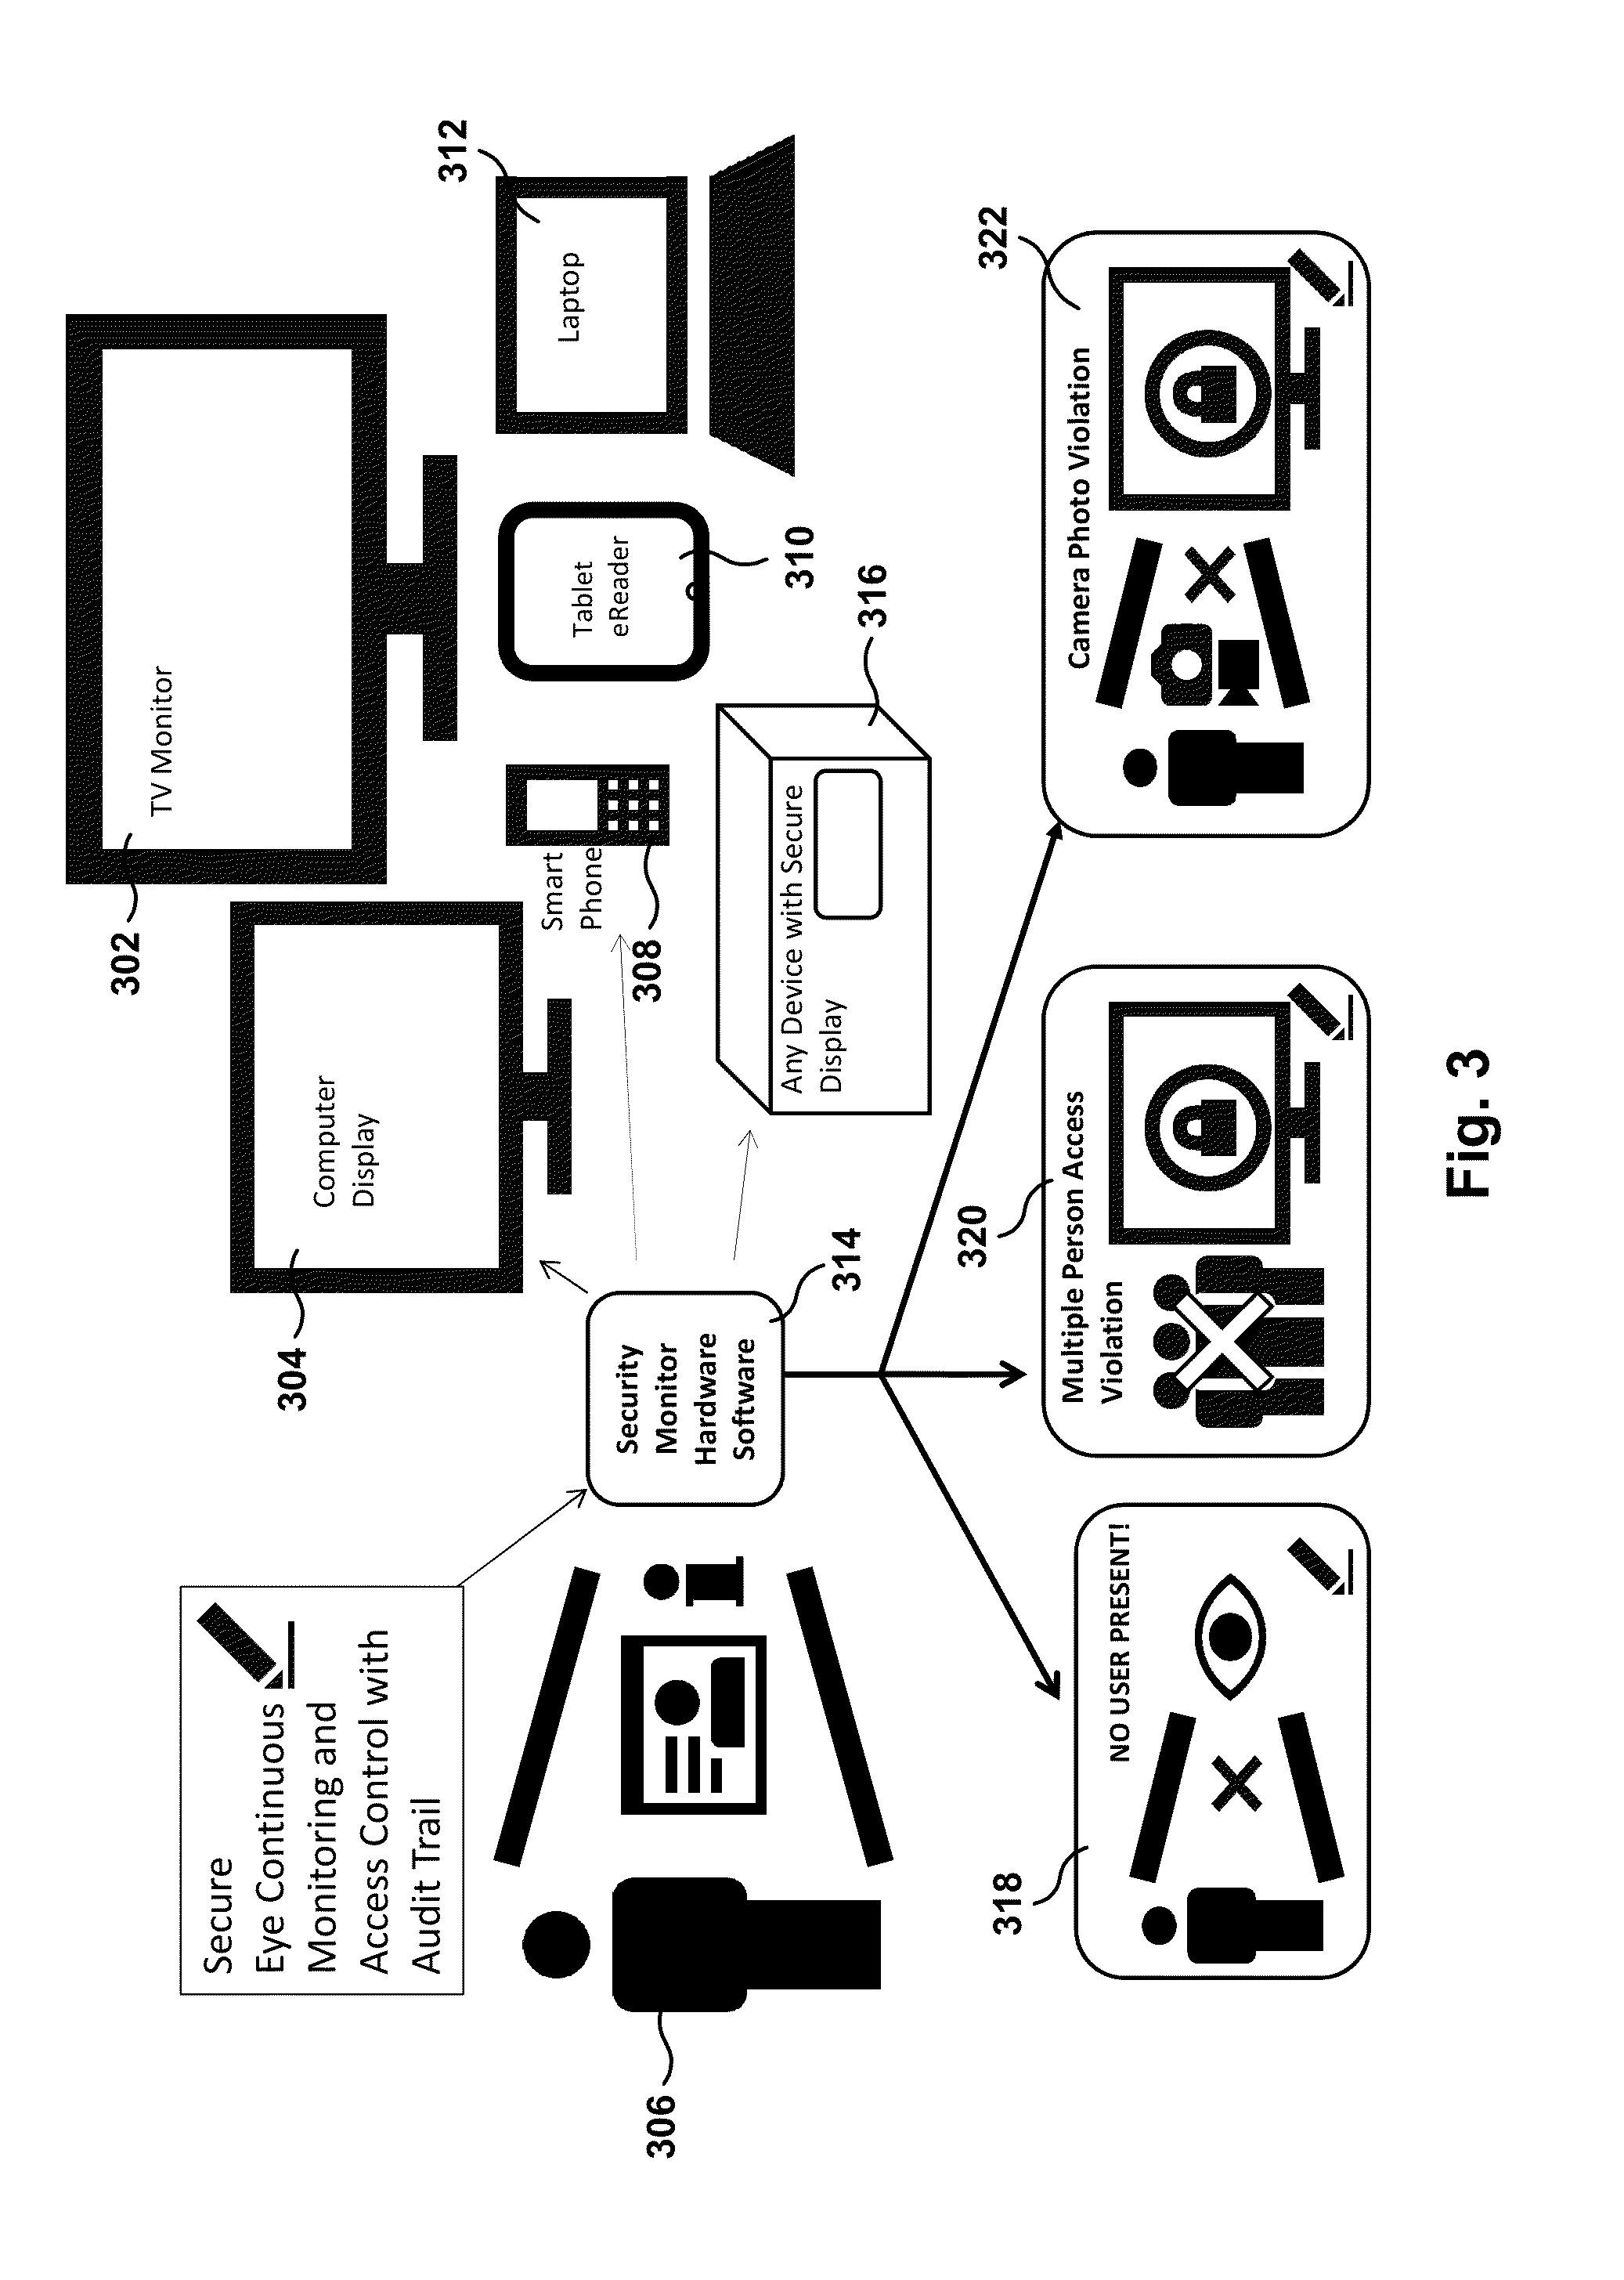 Ongoing Authentication and Access Control with Network Access Device